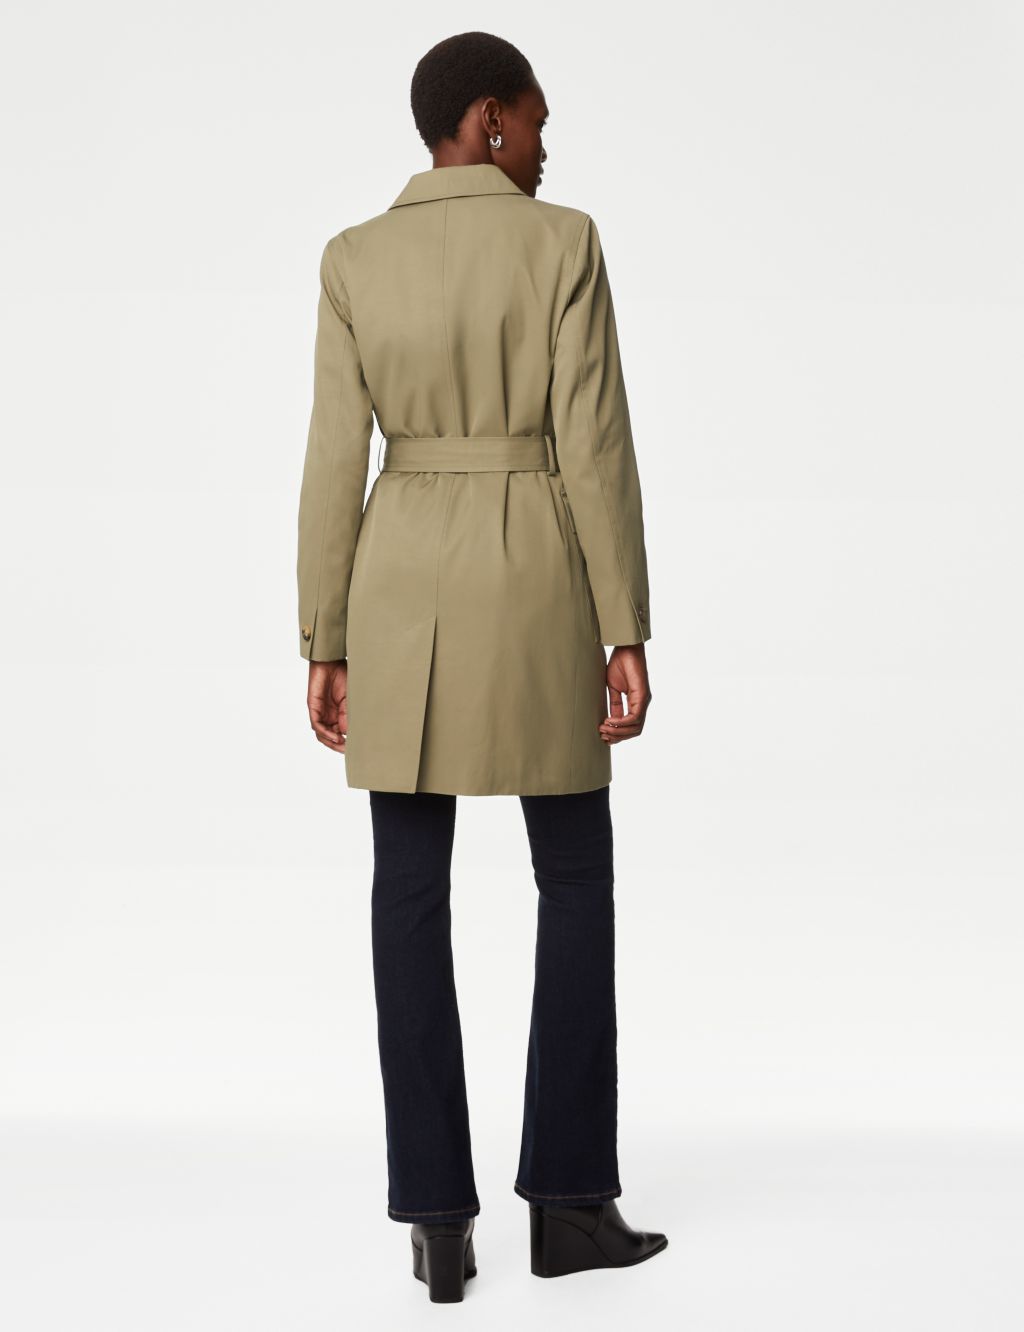 Stormwear™ Belted Single Breasted Trench Coat image 6